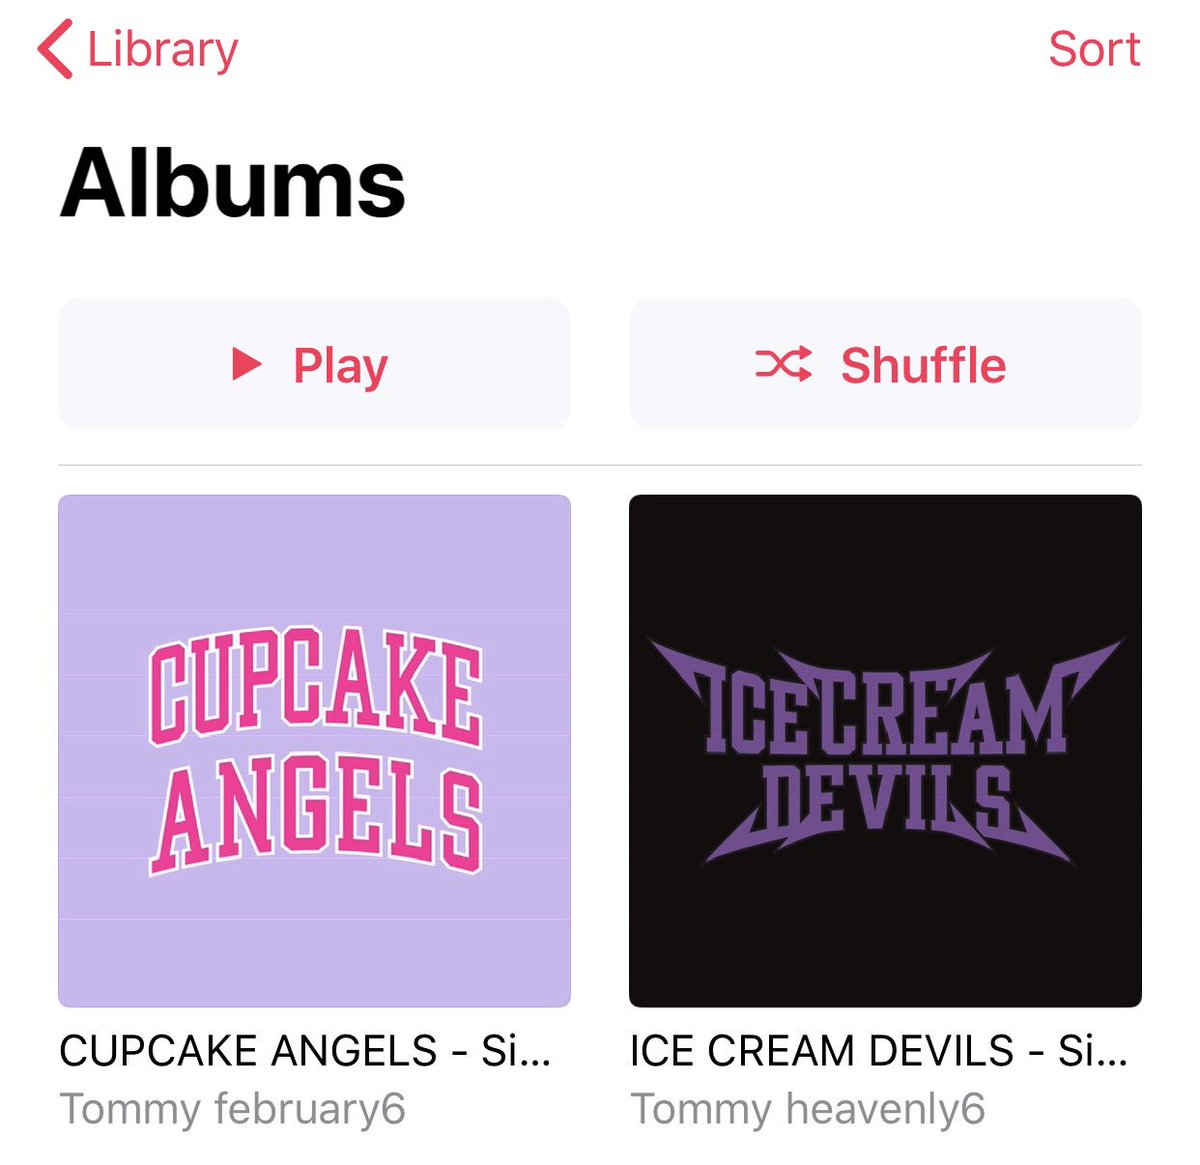 I can’t believe @TOMMY_ARMY has blessed and cursed us with new music from Tommy february6 AND Tommy heavenly6. Wow. #cupcakeangels #icecreamdevils #tommyfebruary6 #tommyheavenly6 #newmusic #jpop #jrock #tomokokawase #thebest #iloveher